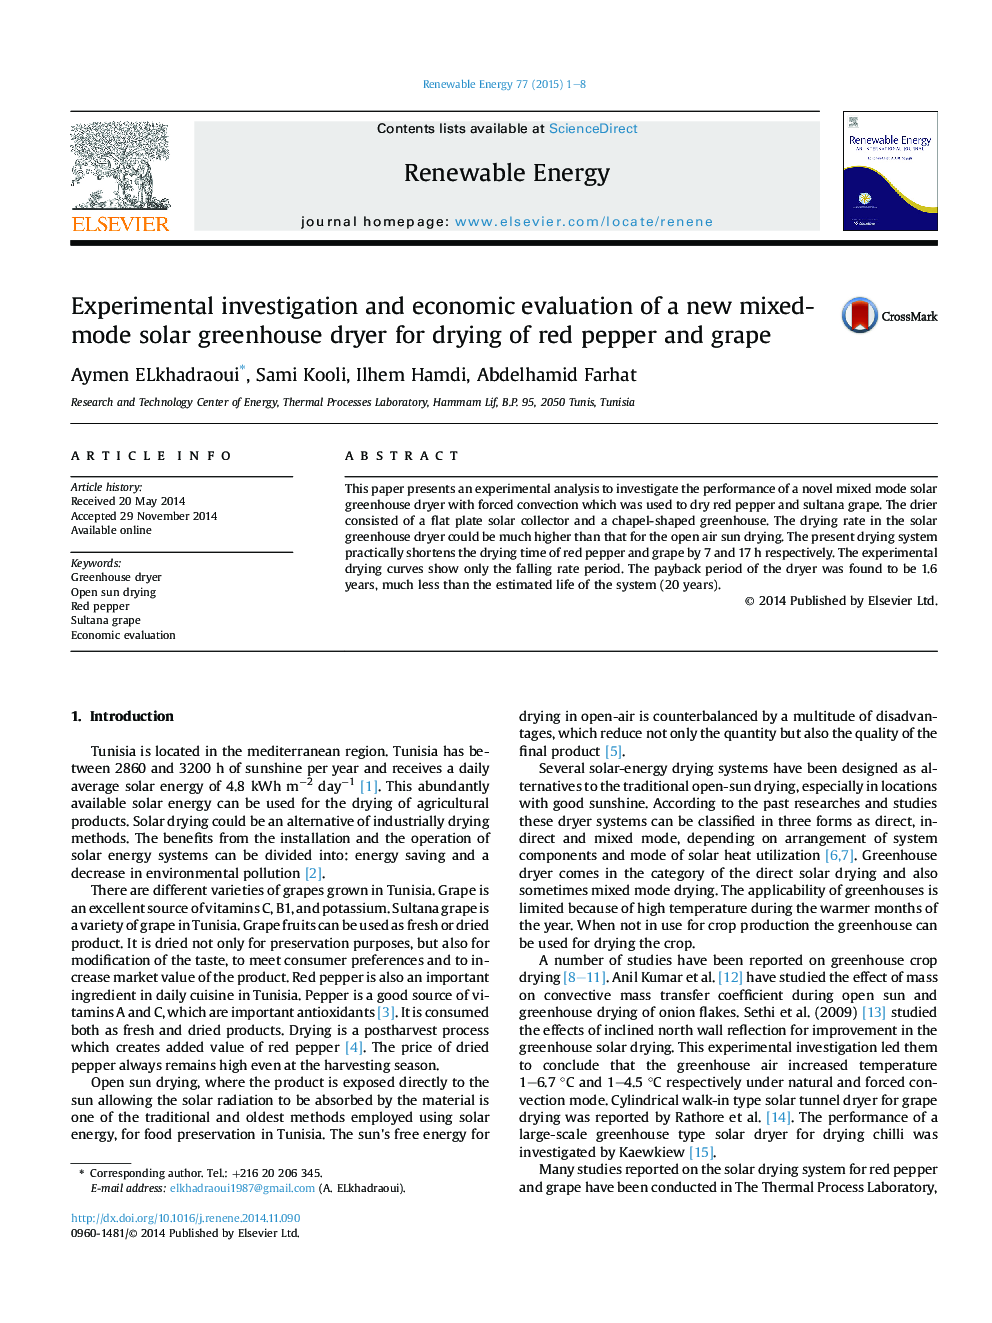 Experimental investigation and economic evaluation of a new mixed-mode solar greenhouse dryer for drying of red pepper and grape